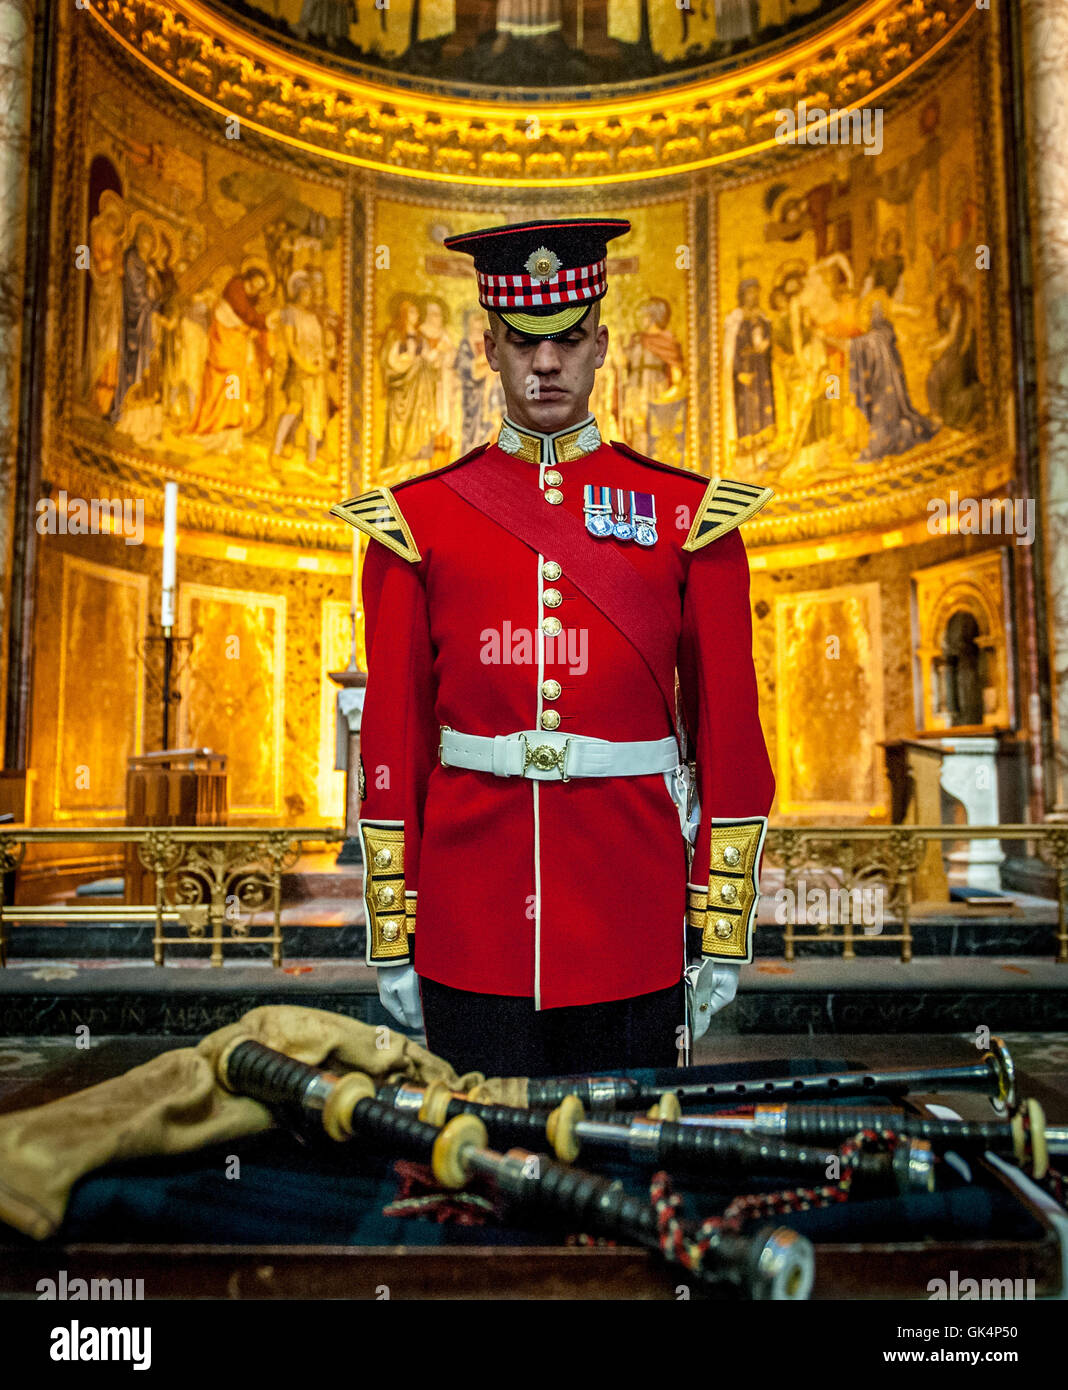 Will Casson-Smith, Warrant Officer, First Class Band Master accompanied by Piper John Mitchell, lay a set of 100-year-old bagpipes belonging to Pipe Major William Lawrie of the Argyll and Sunderland Regiment in the Chapel of Wellington Barracks. Major Law Stock Photo